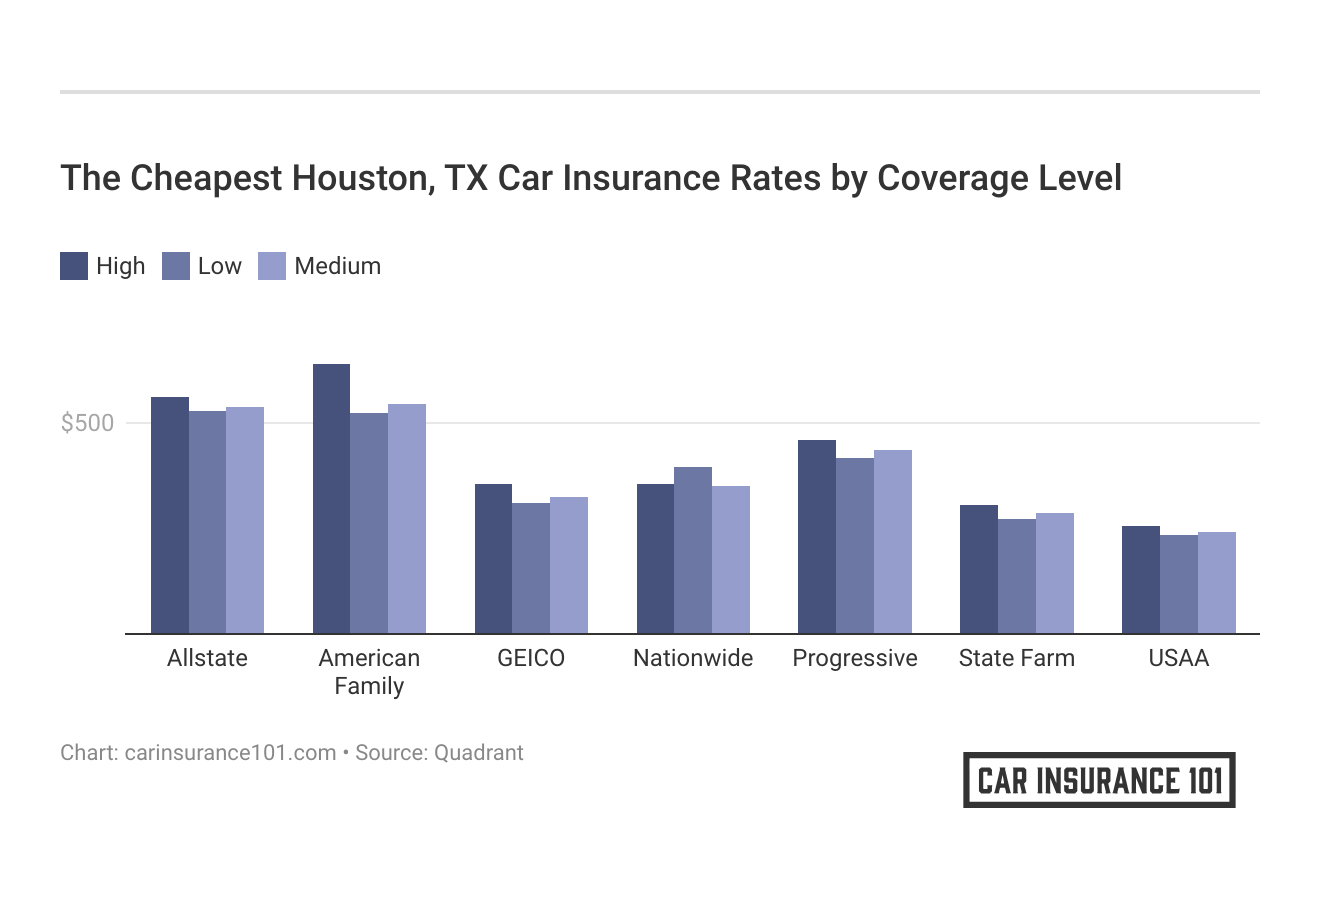 <h3>The Cheapest Houston, TX Car Insurance Rates by Coverage Level</h3>